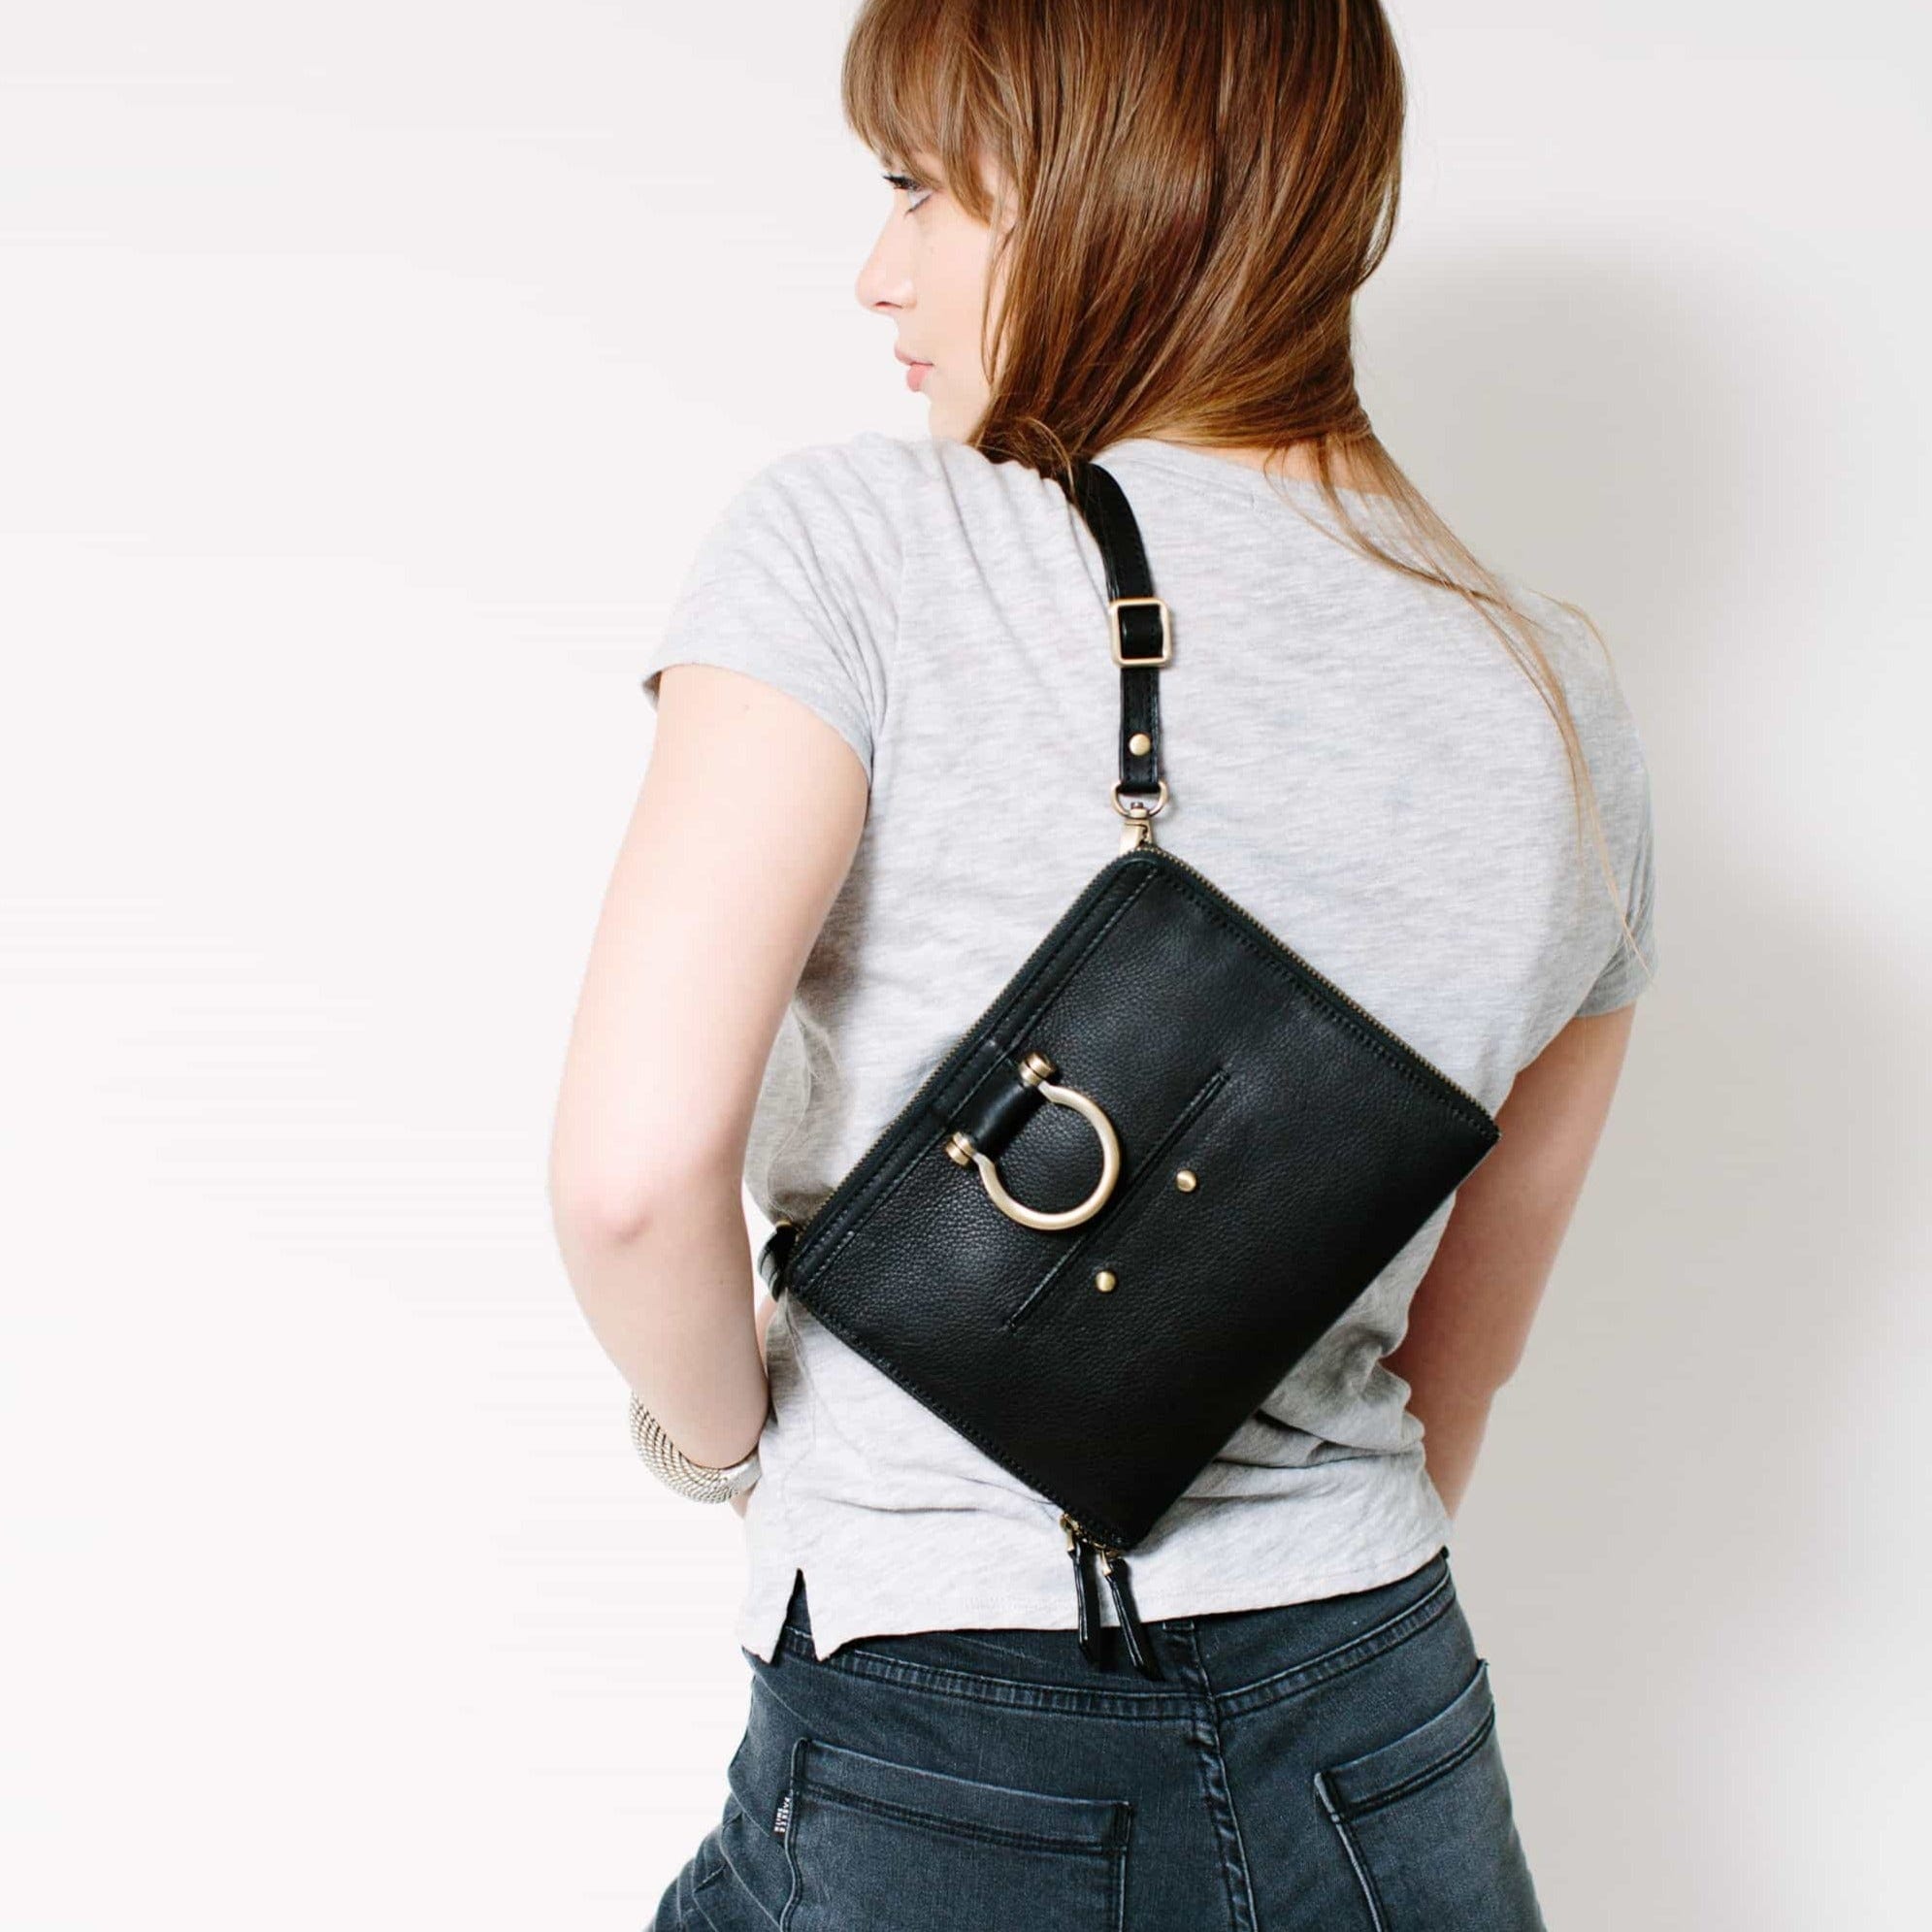 Wear the M mini crossbody bag in black raw leather over your shoulder to show off the Omega brass hardware.